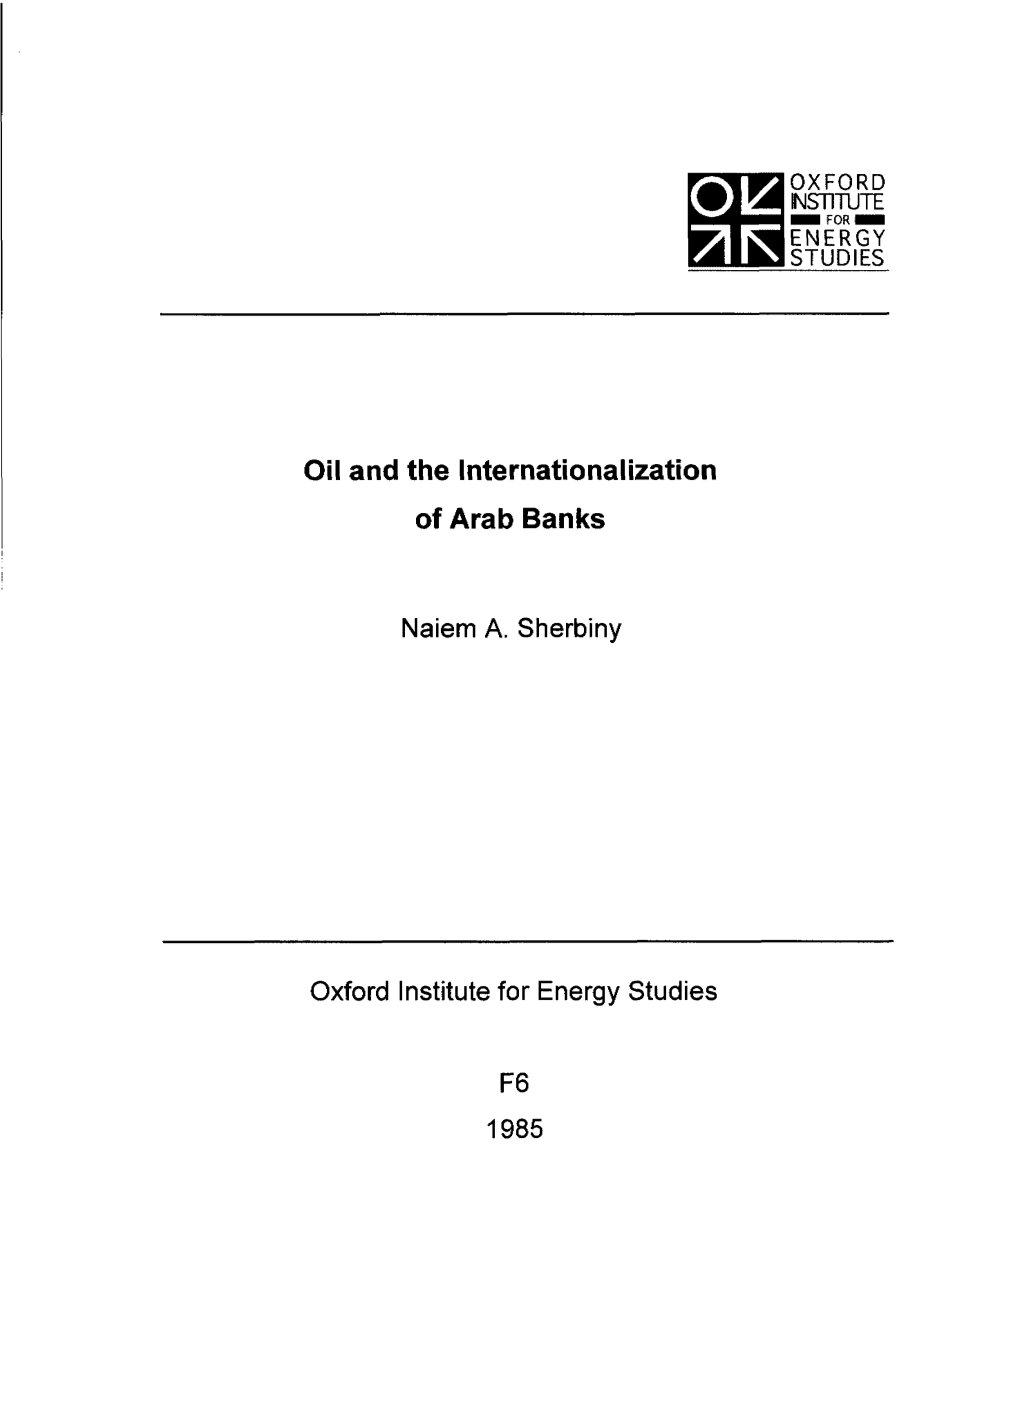 Oil and the Internationalization of Arab Banks